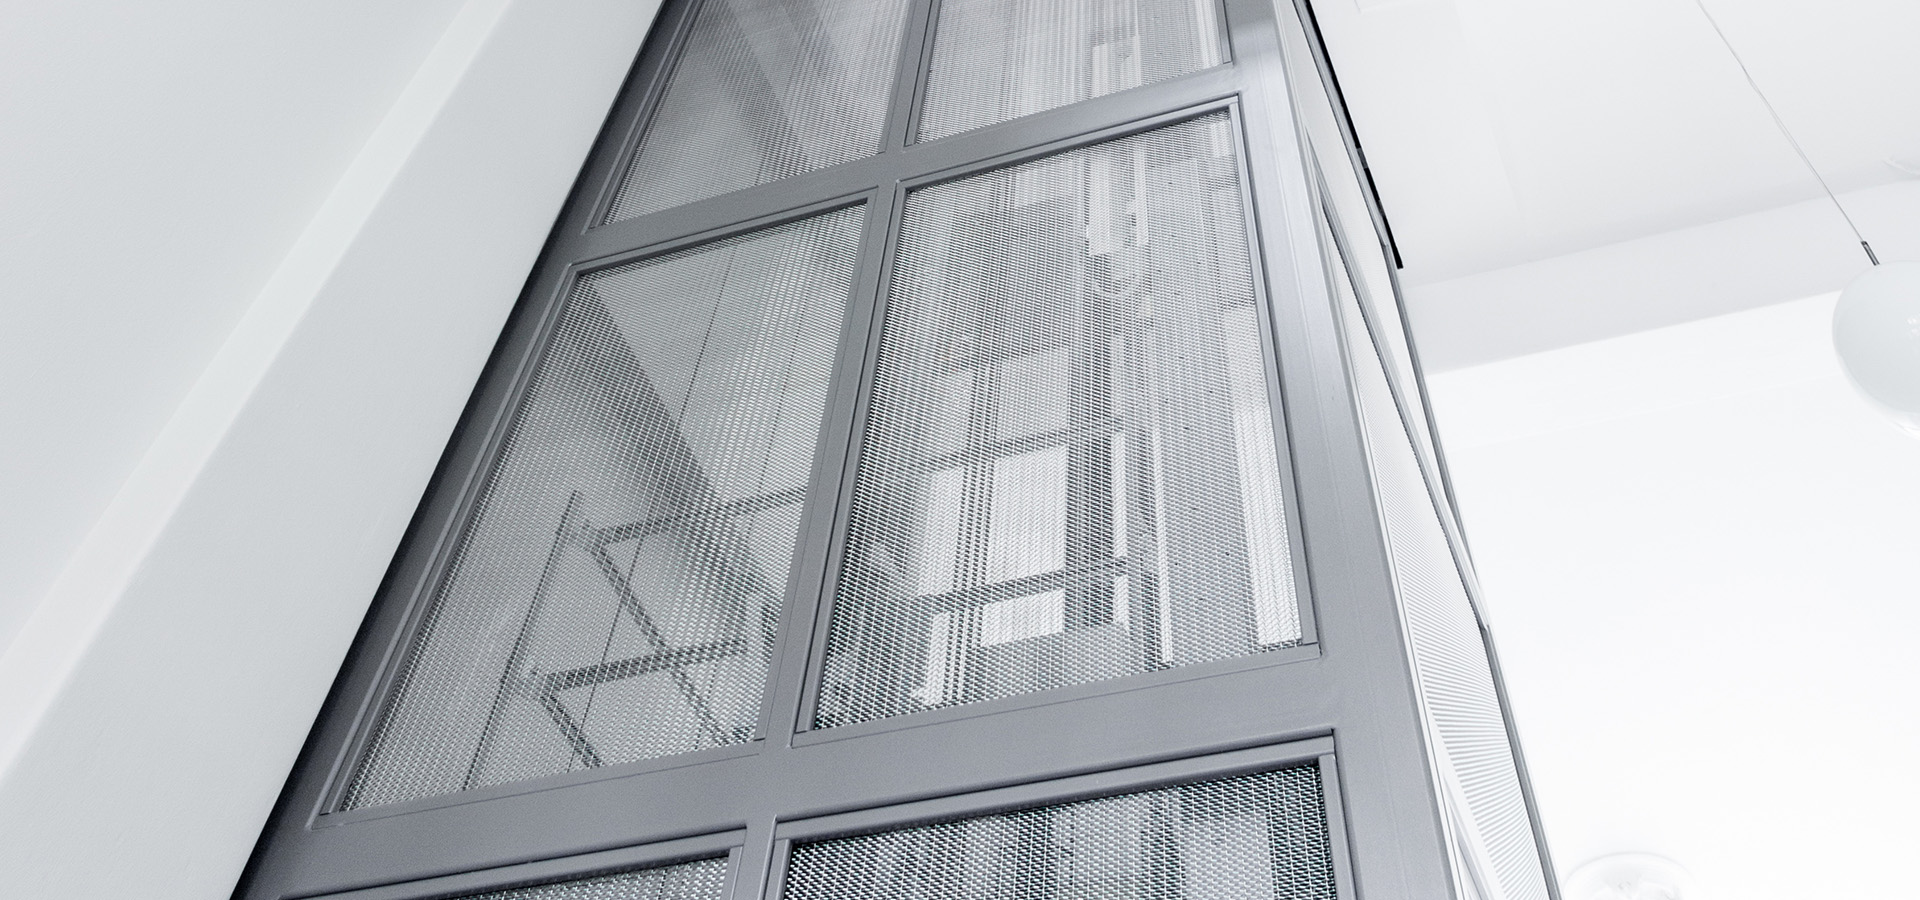 Cladding of a lift using HAVER architectural wire mesh